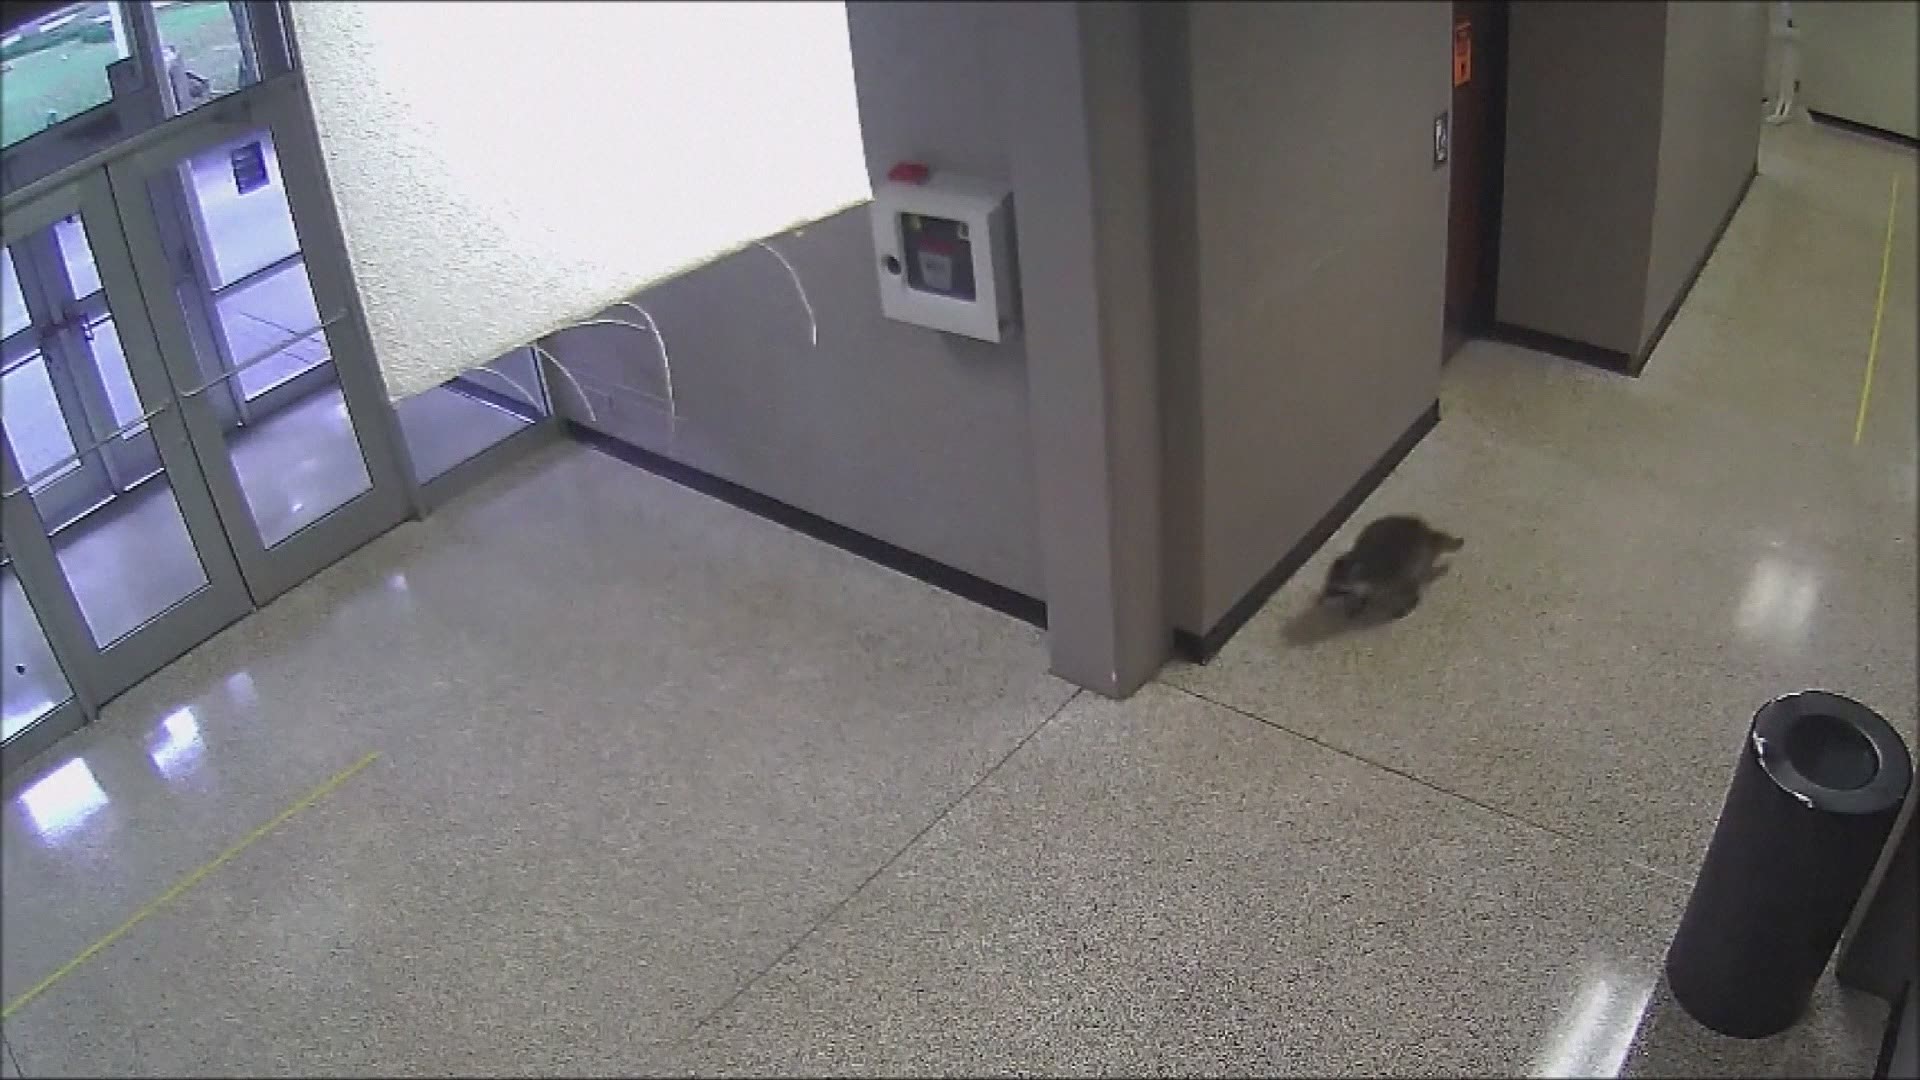 School staff and animal control officers chased a raccoon through the hallways of a Dallas-area high school.